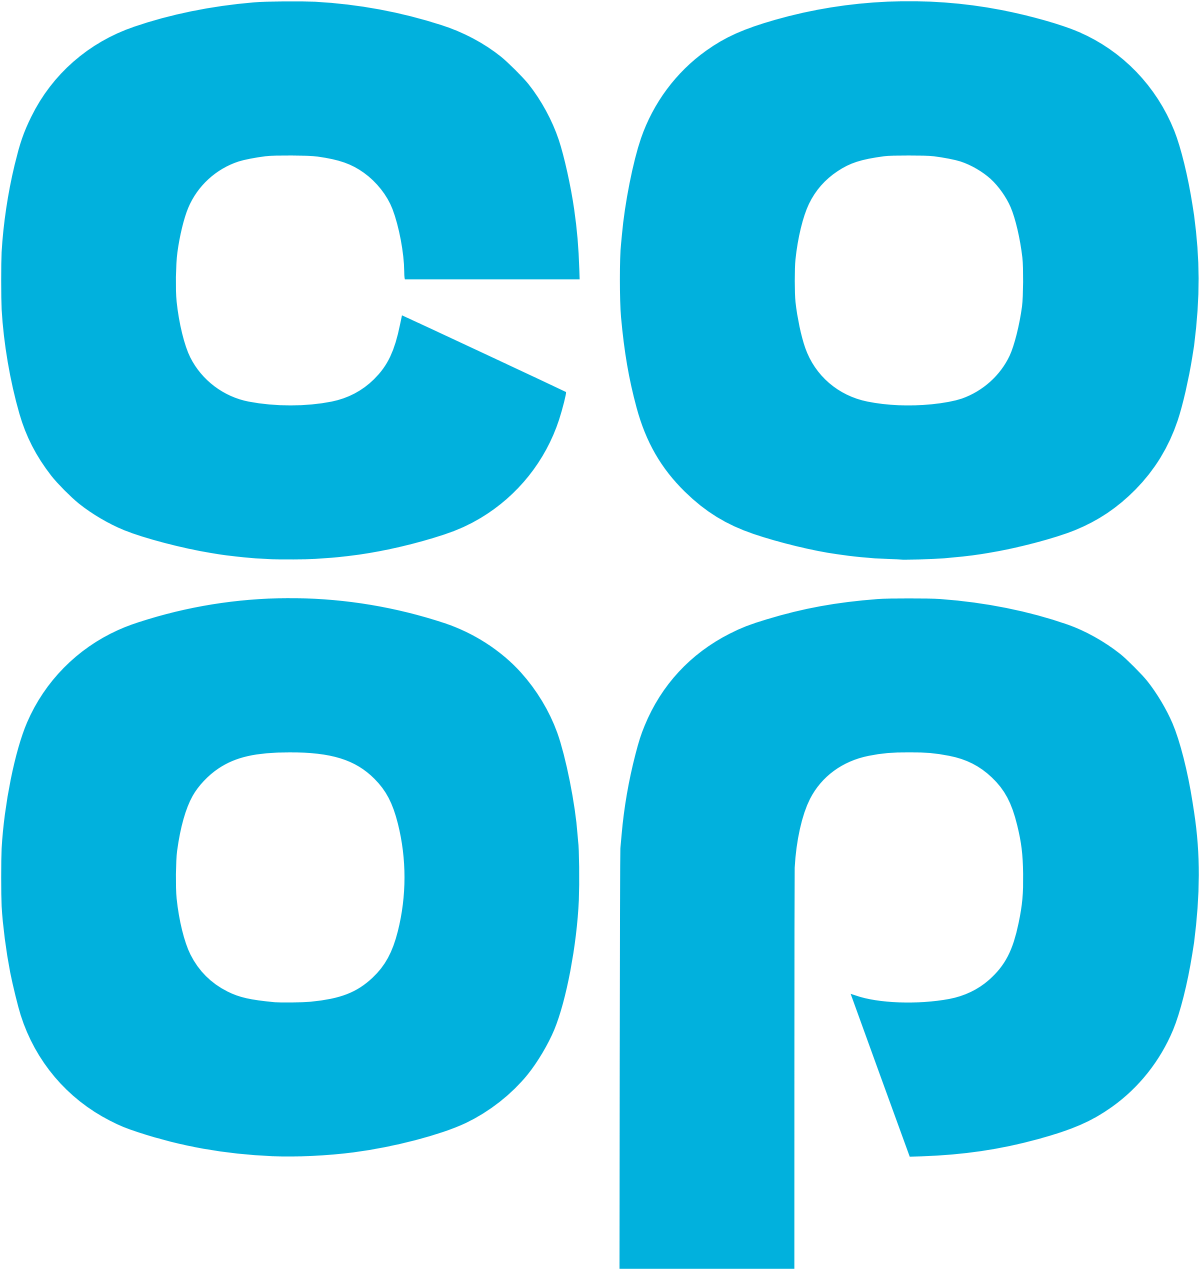 COOP Shopping Logo and Link